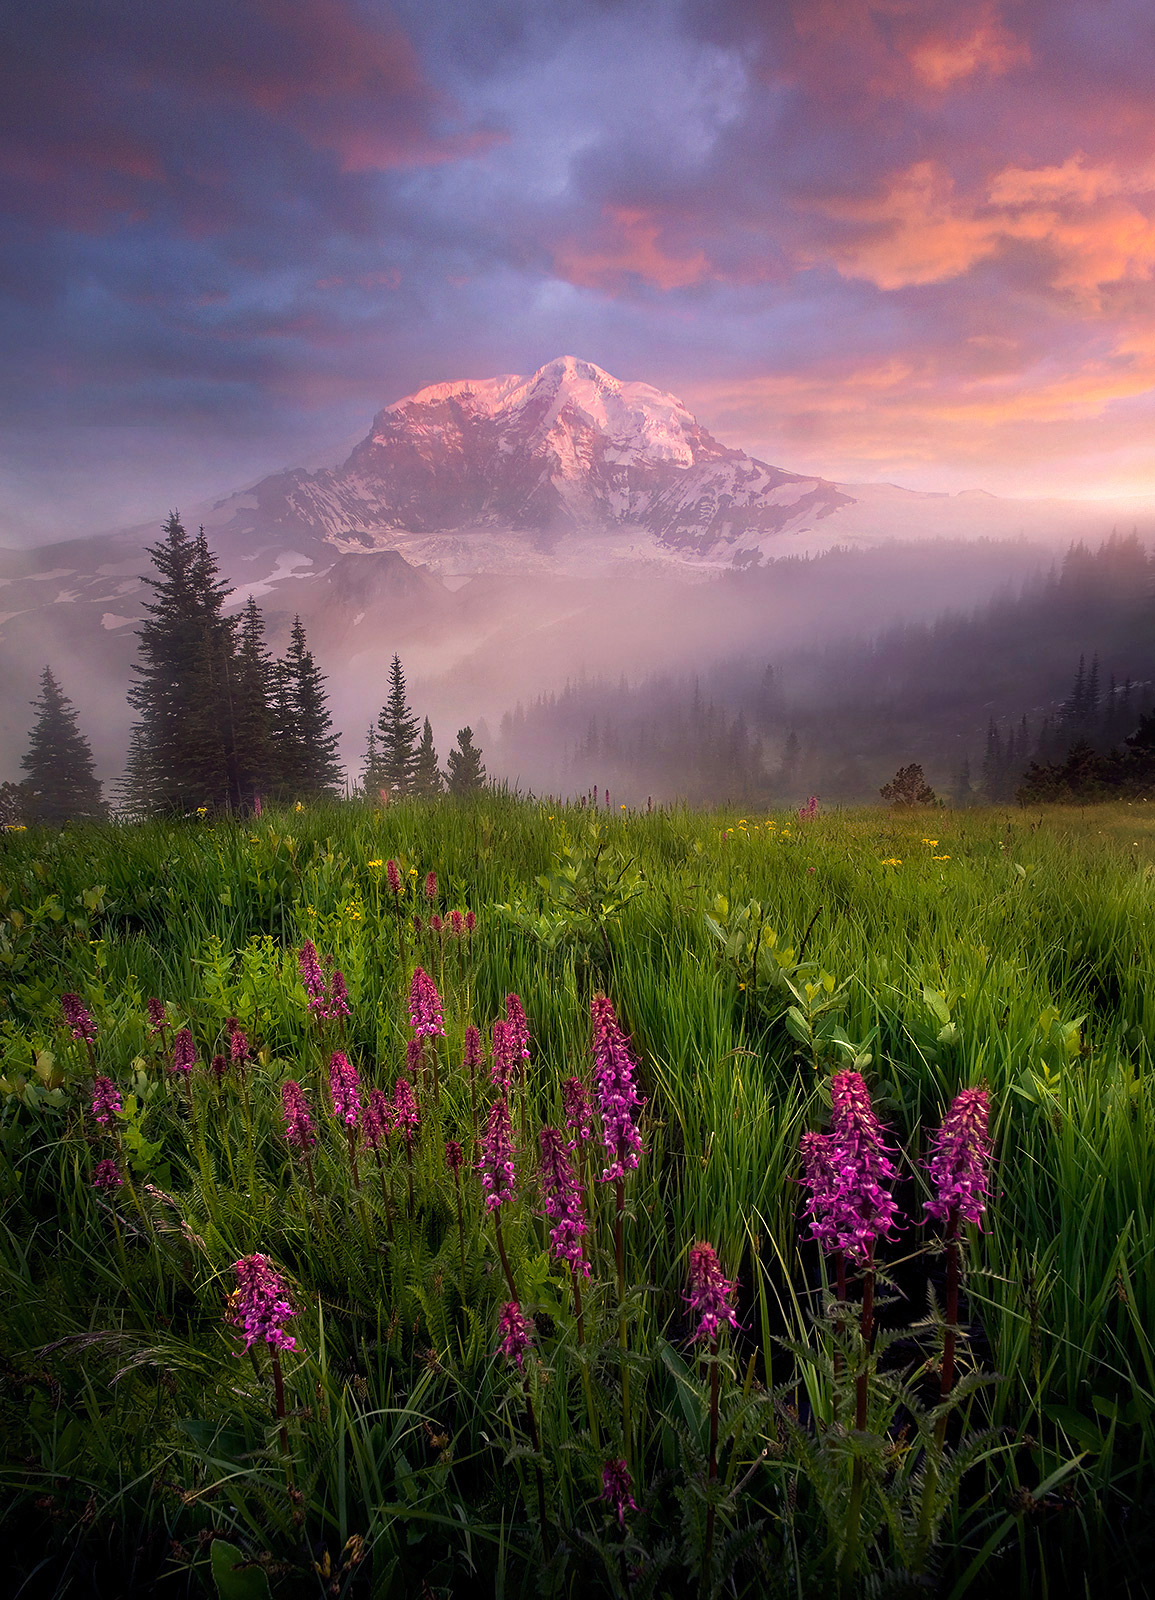 If you ask me, the best perspective on Washington's amazing Mount Rainier is the backpacking trip to the North Face, a stunning...